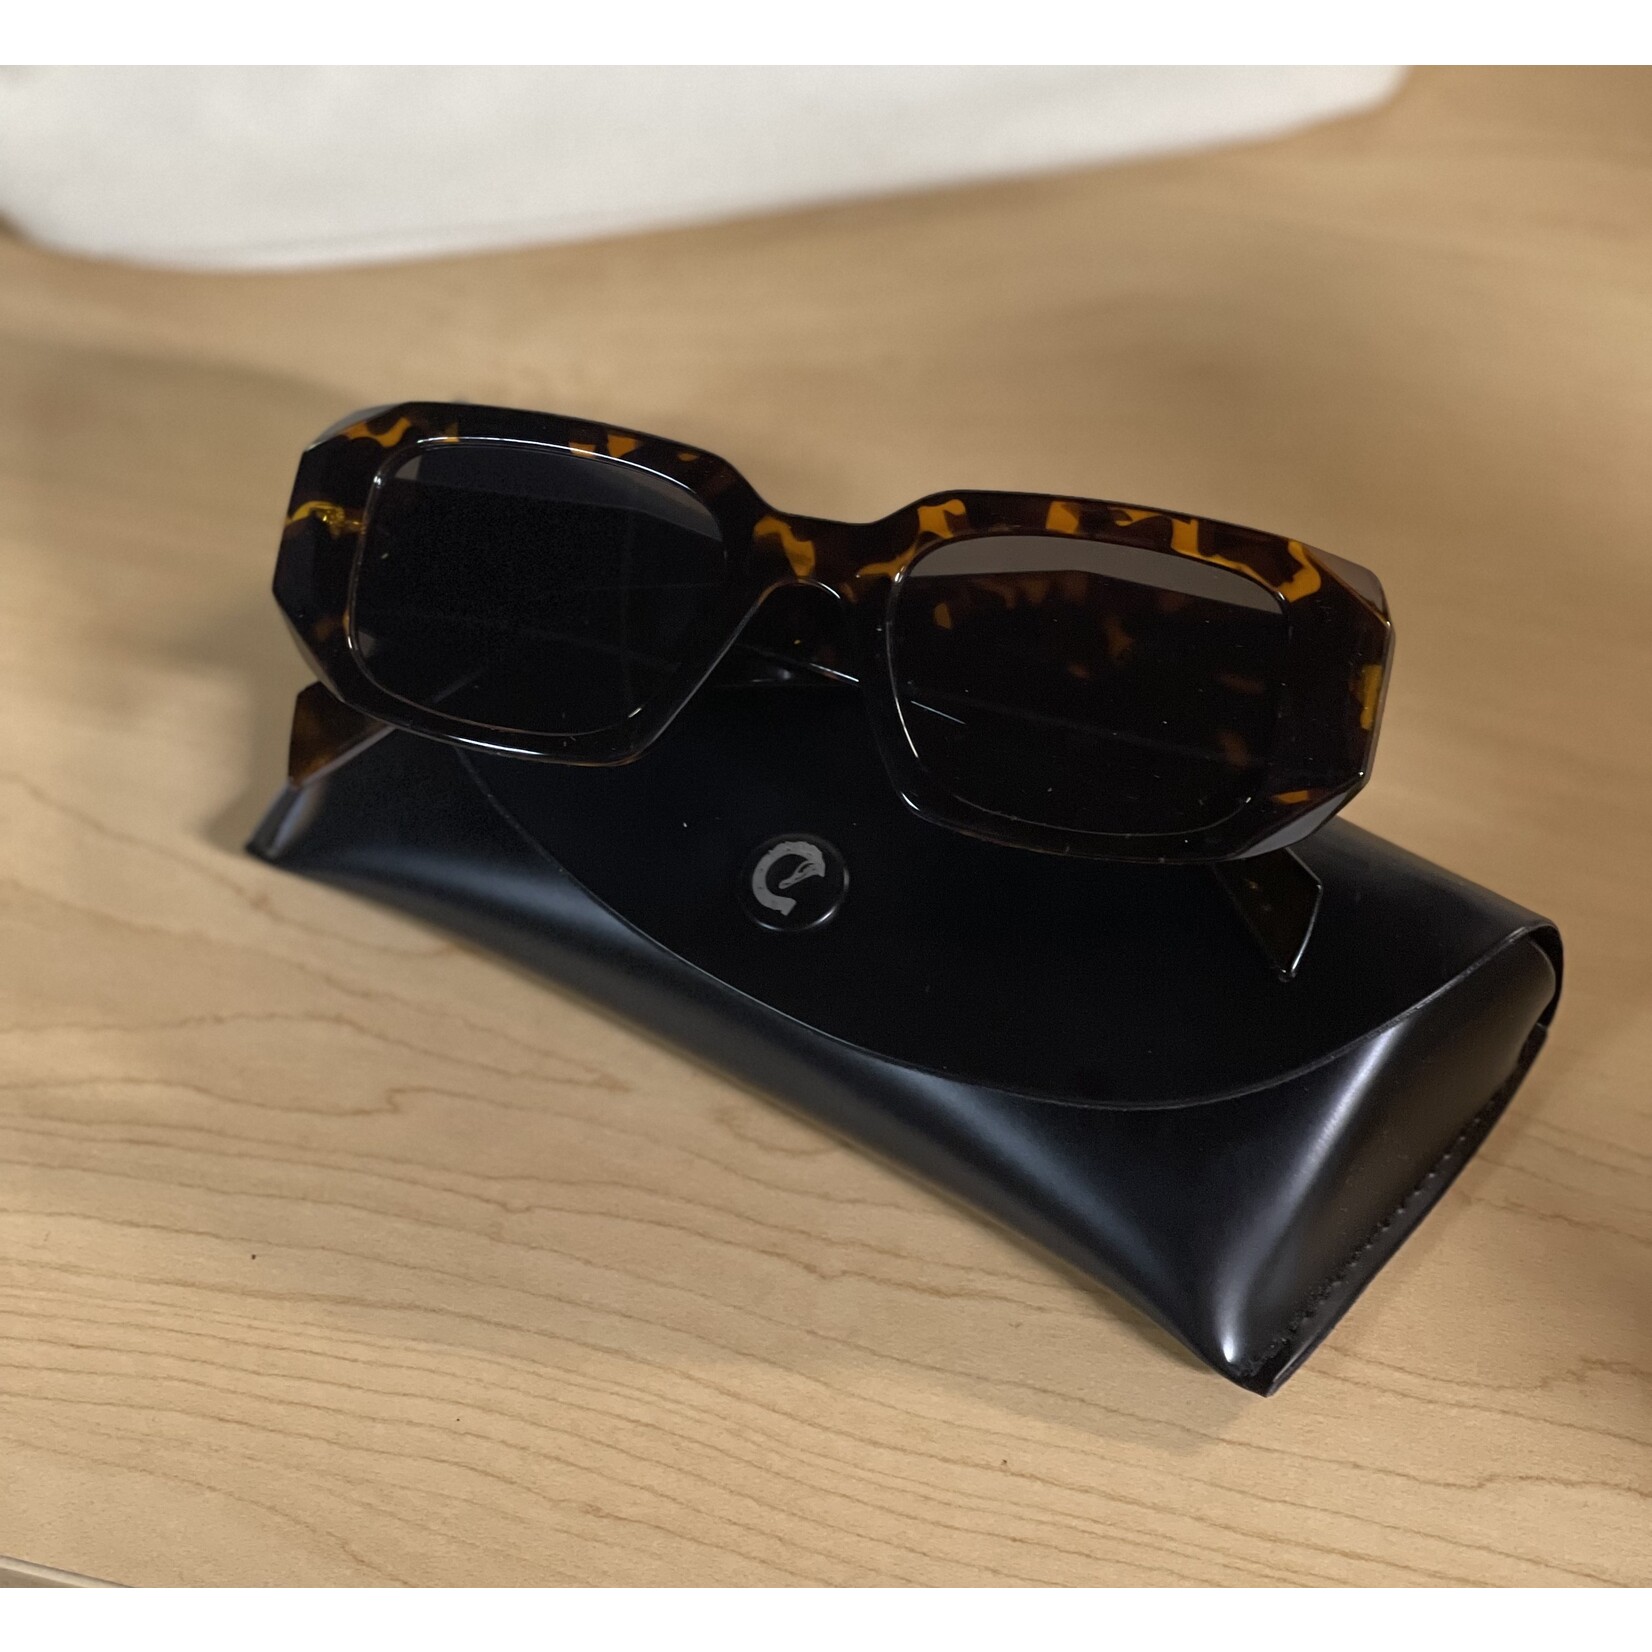 UV400 Protective Sunglasses For Men And Women Designer Full Frame Square  Plate With Retro Style And Fashionable Features From Aawqq, $35.09